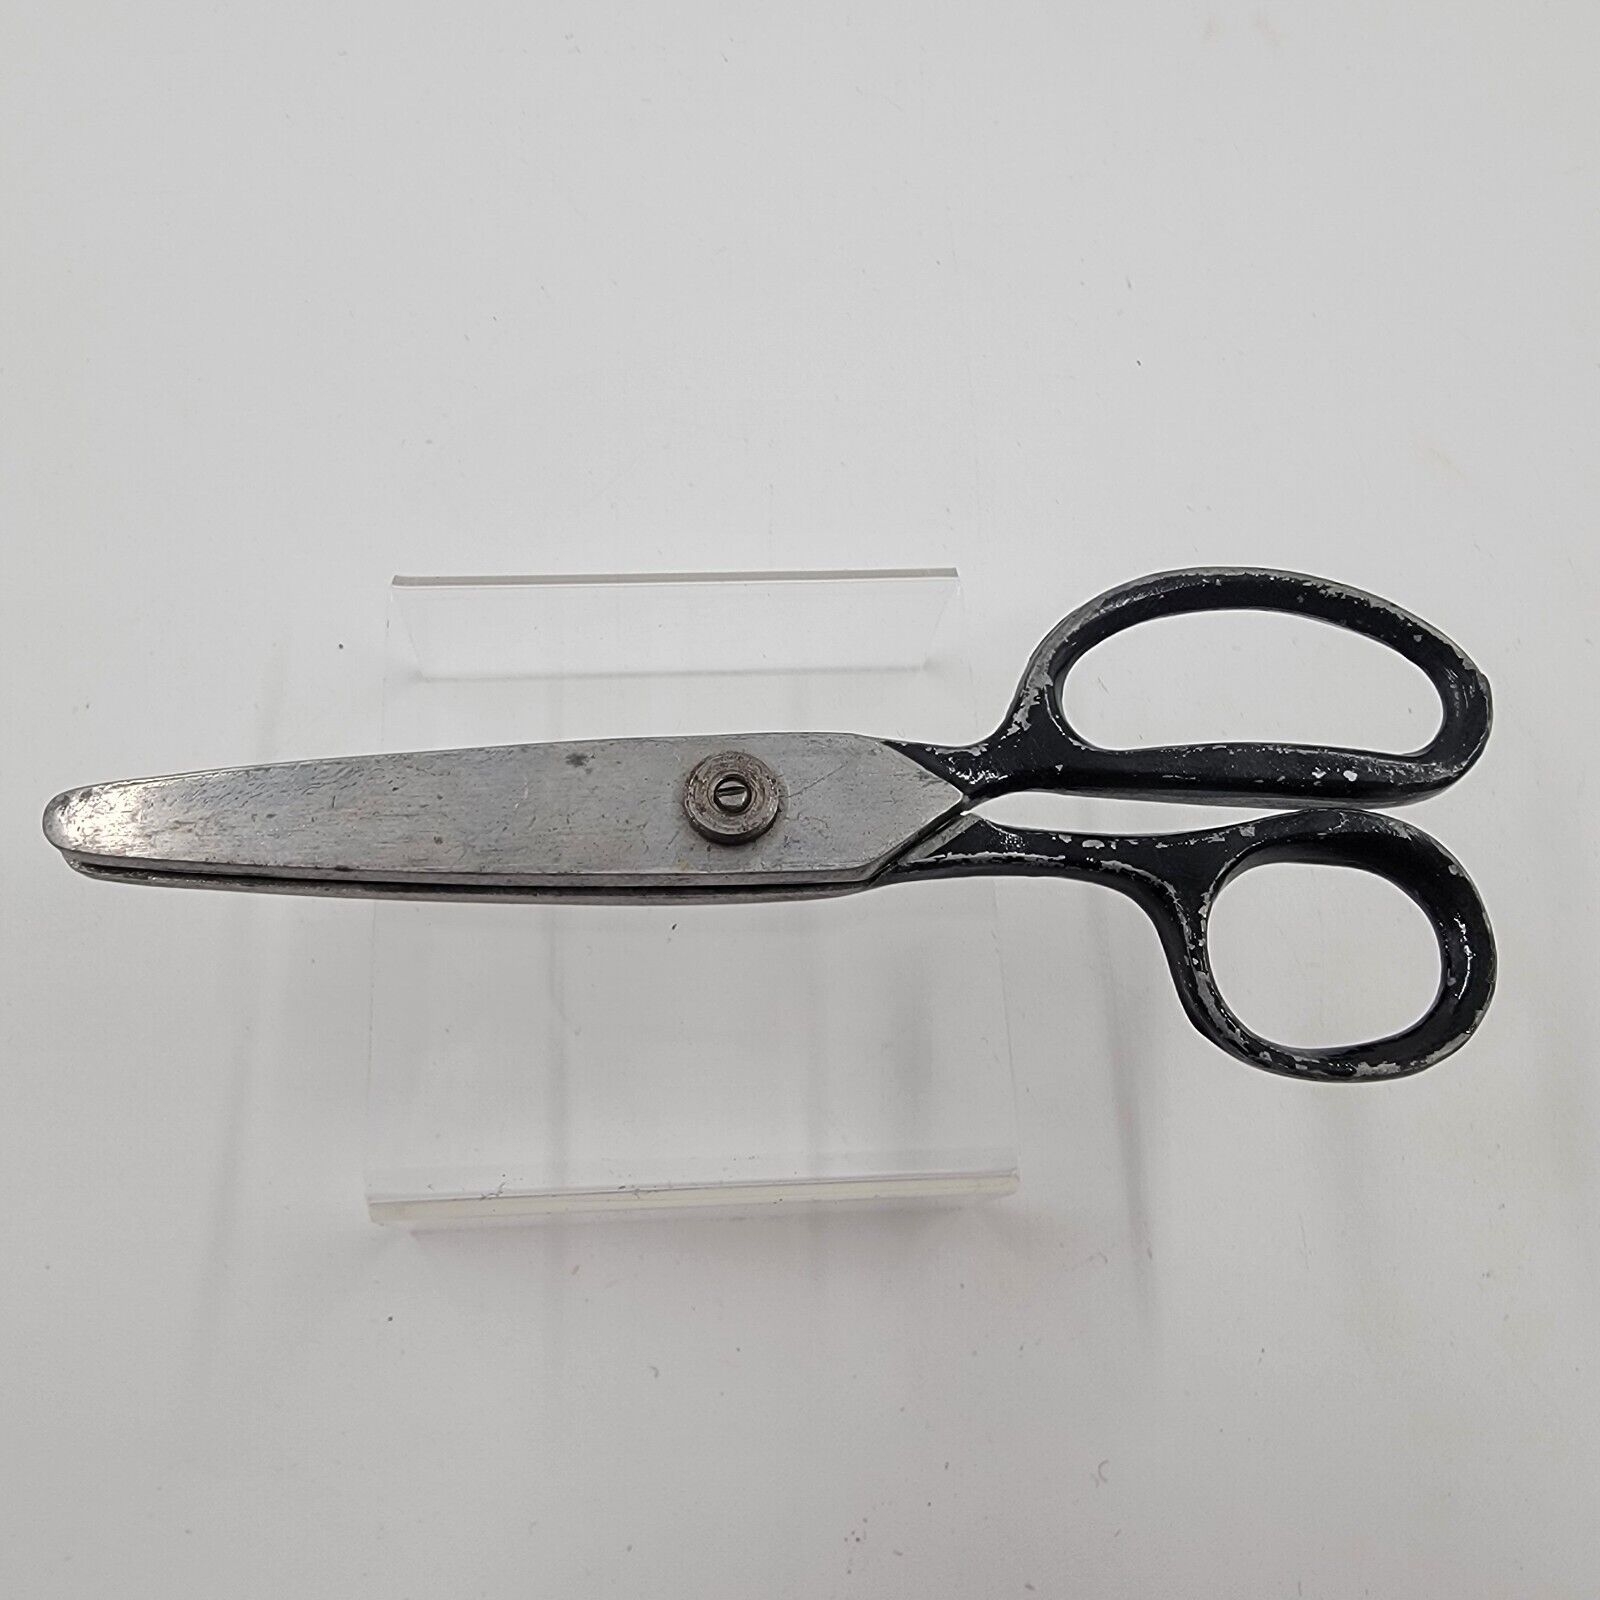 Antique Wales Pinking Shears 7 inch Made in Japan